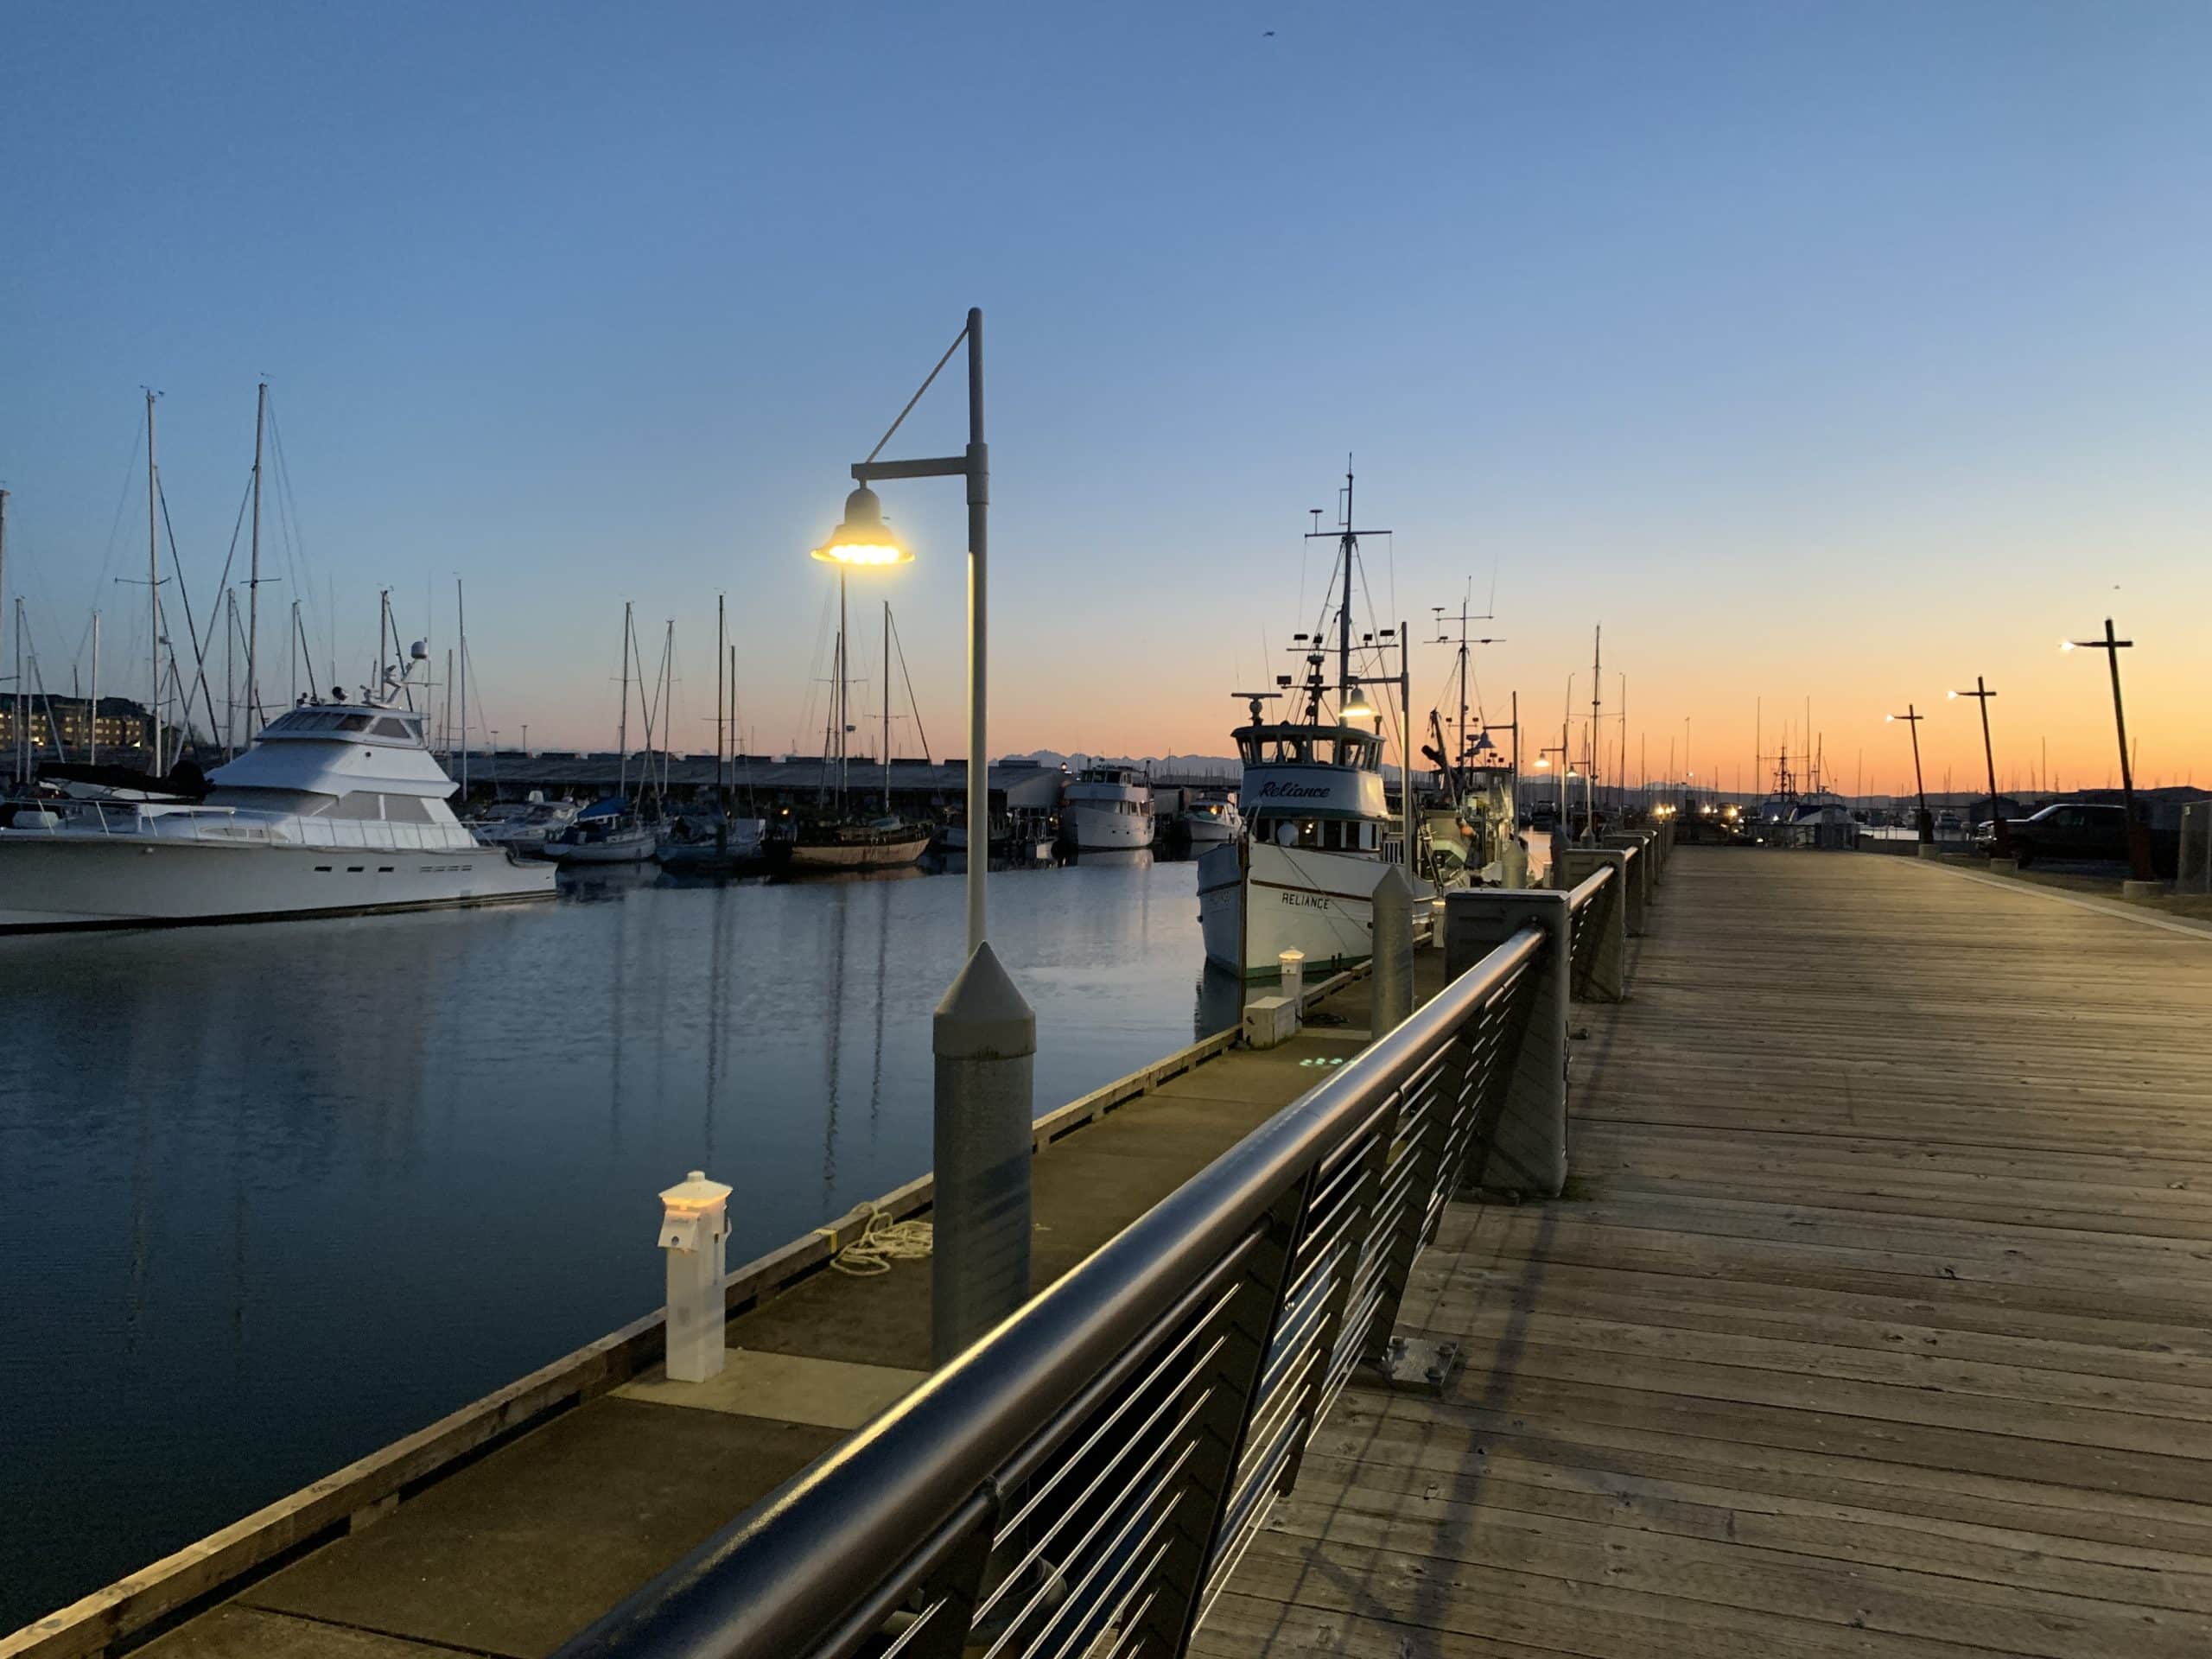 Boats sit on the Port of Everett marina around sunset with a boardwalk along the side